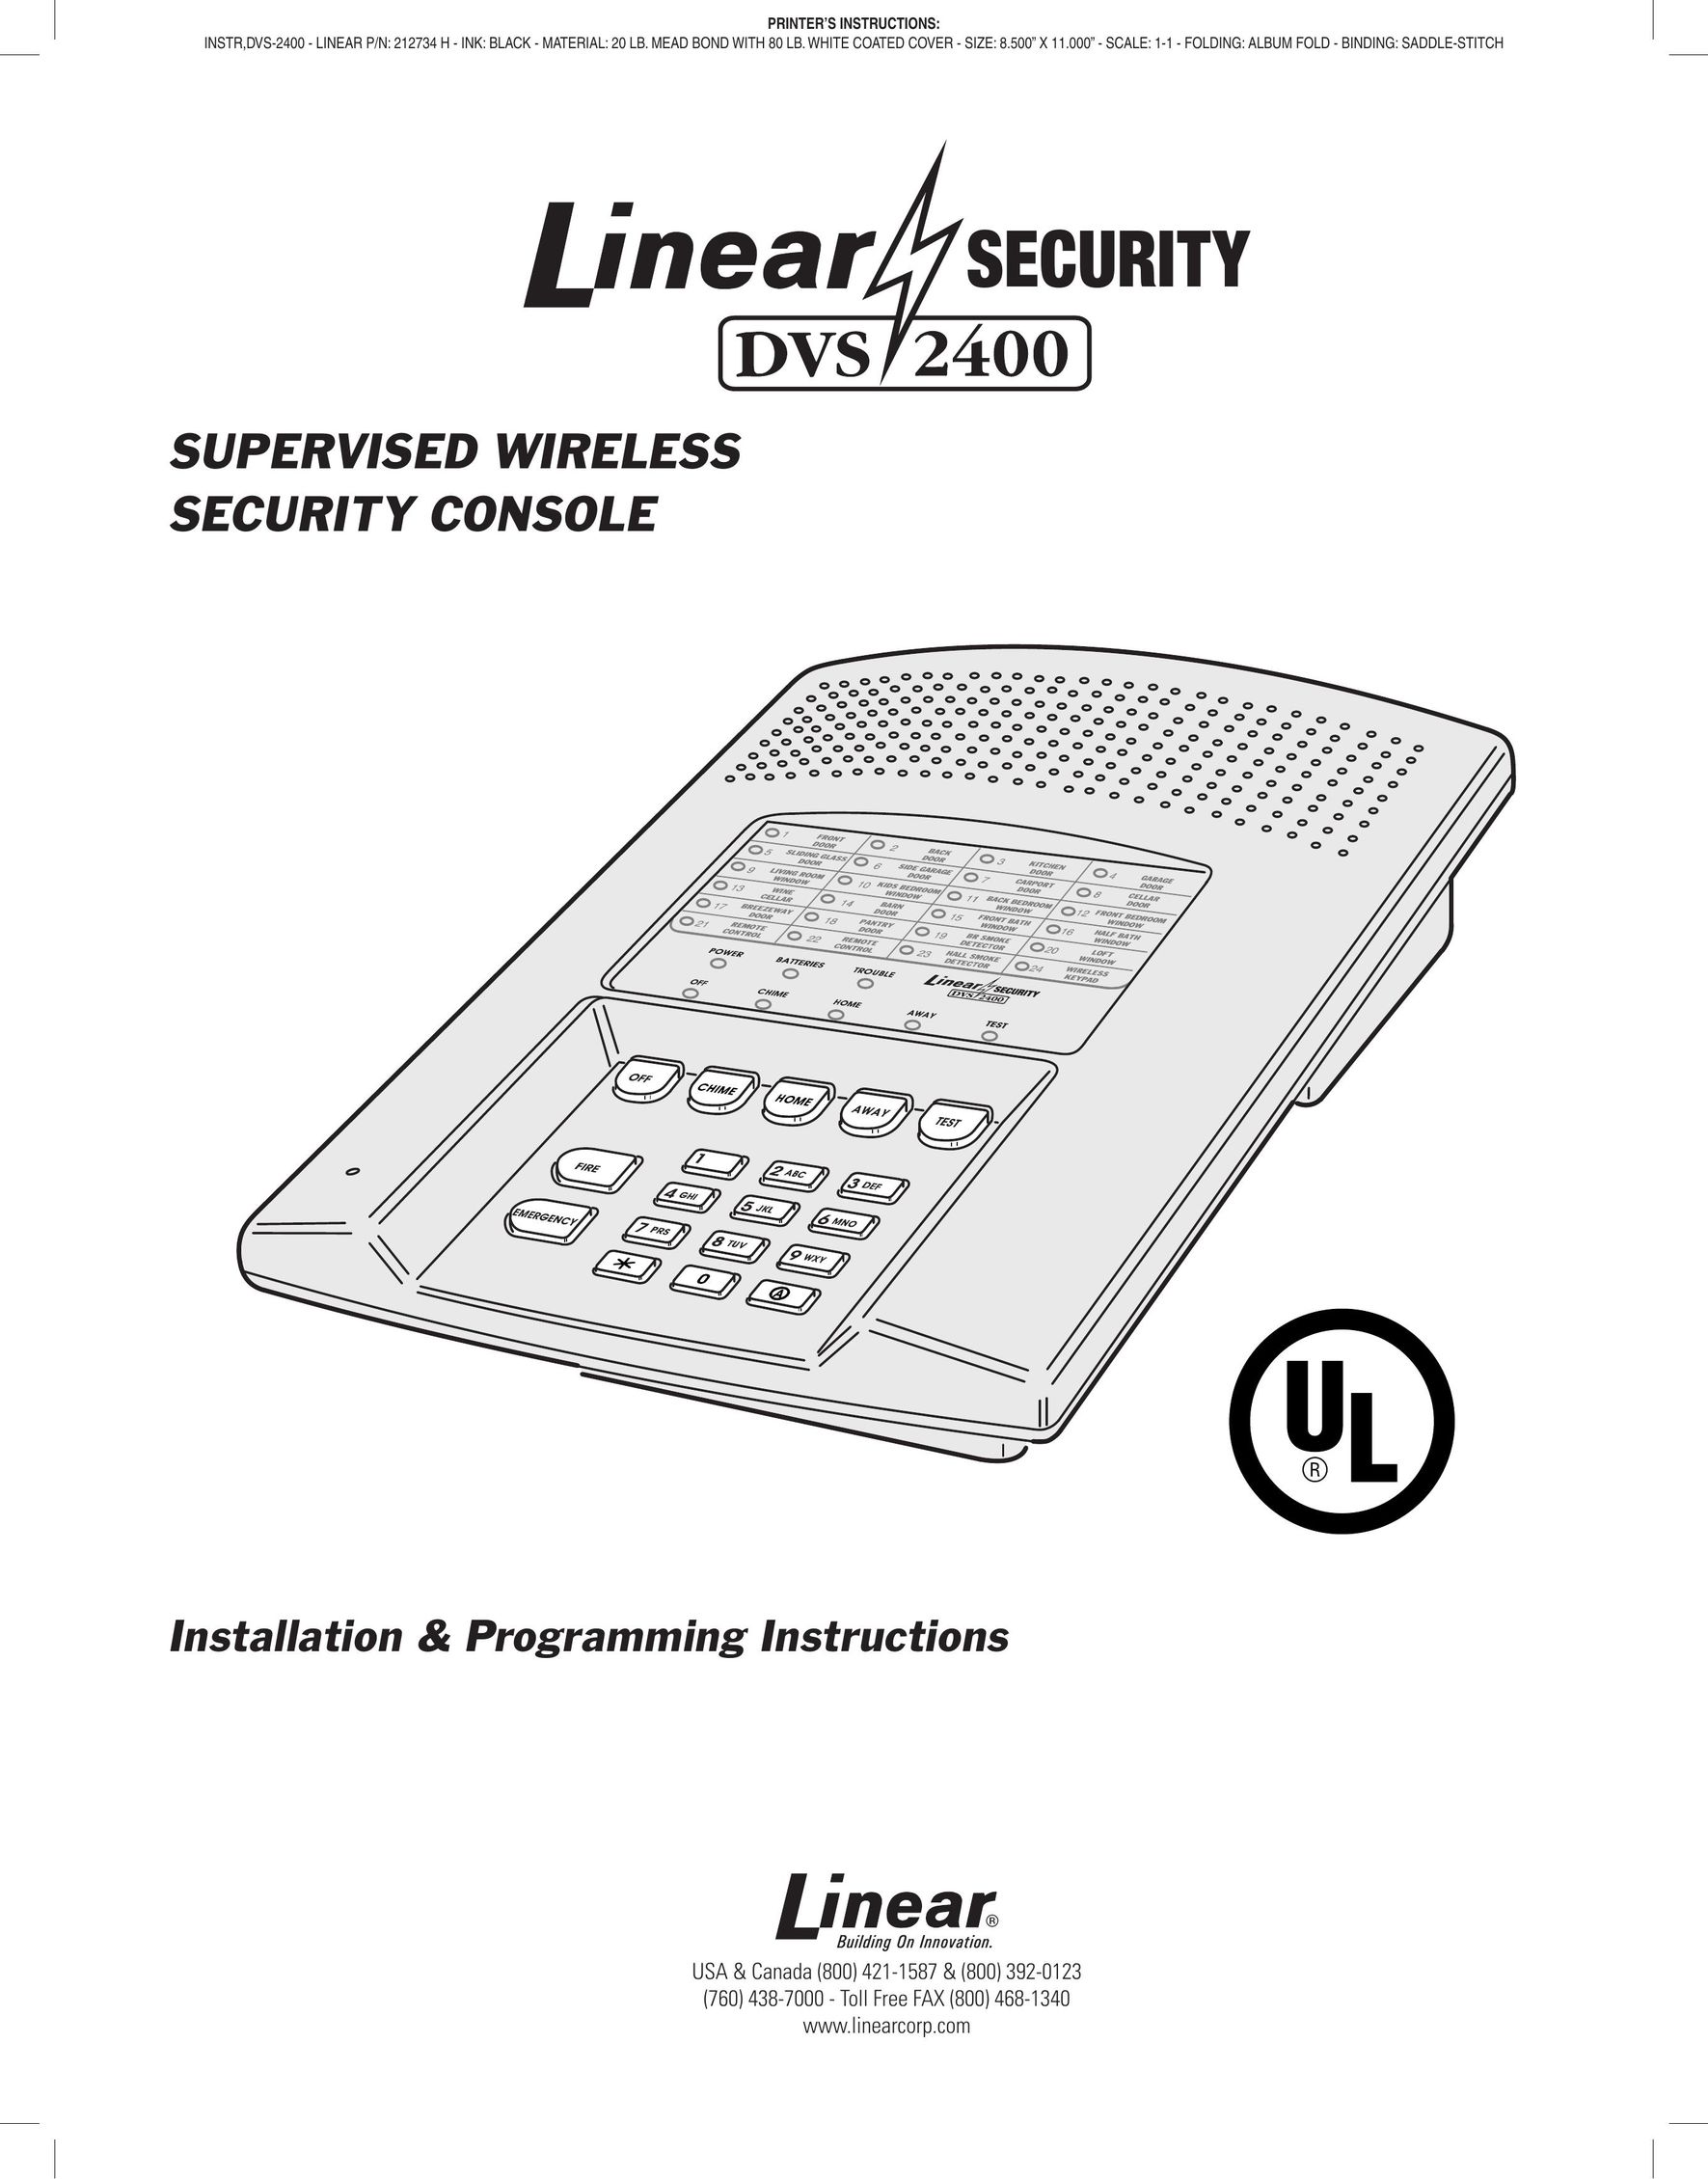 Linear DVS-2400 Home Security System User Manual